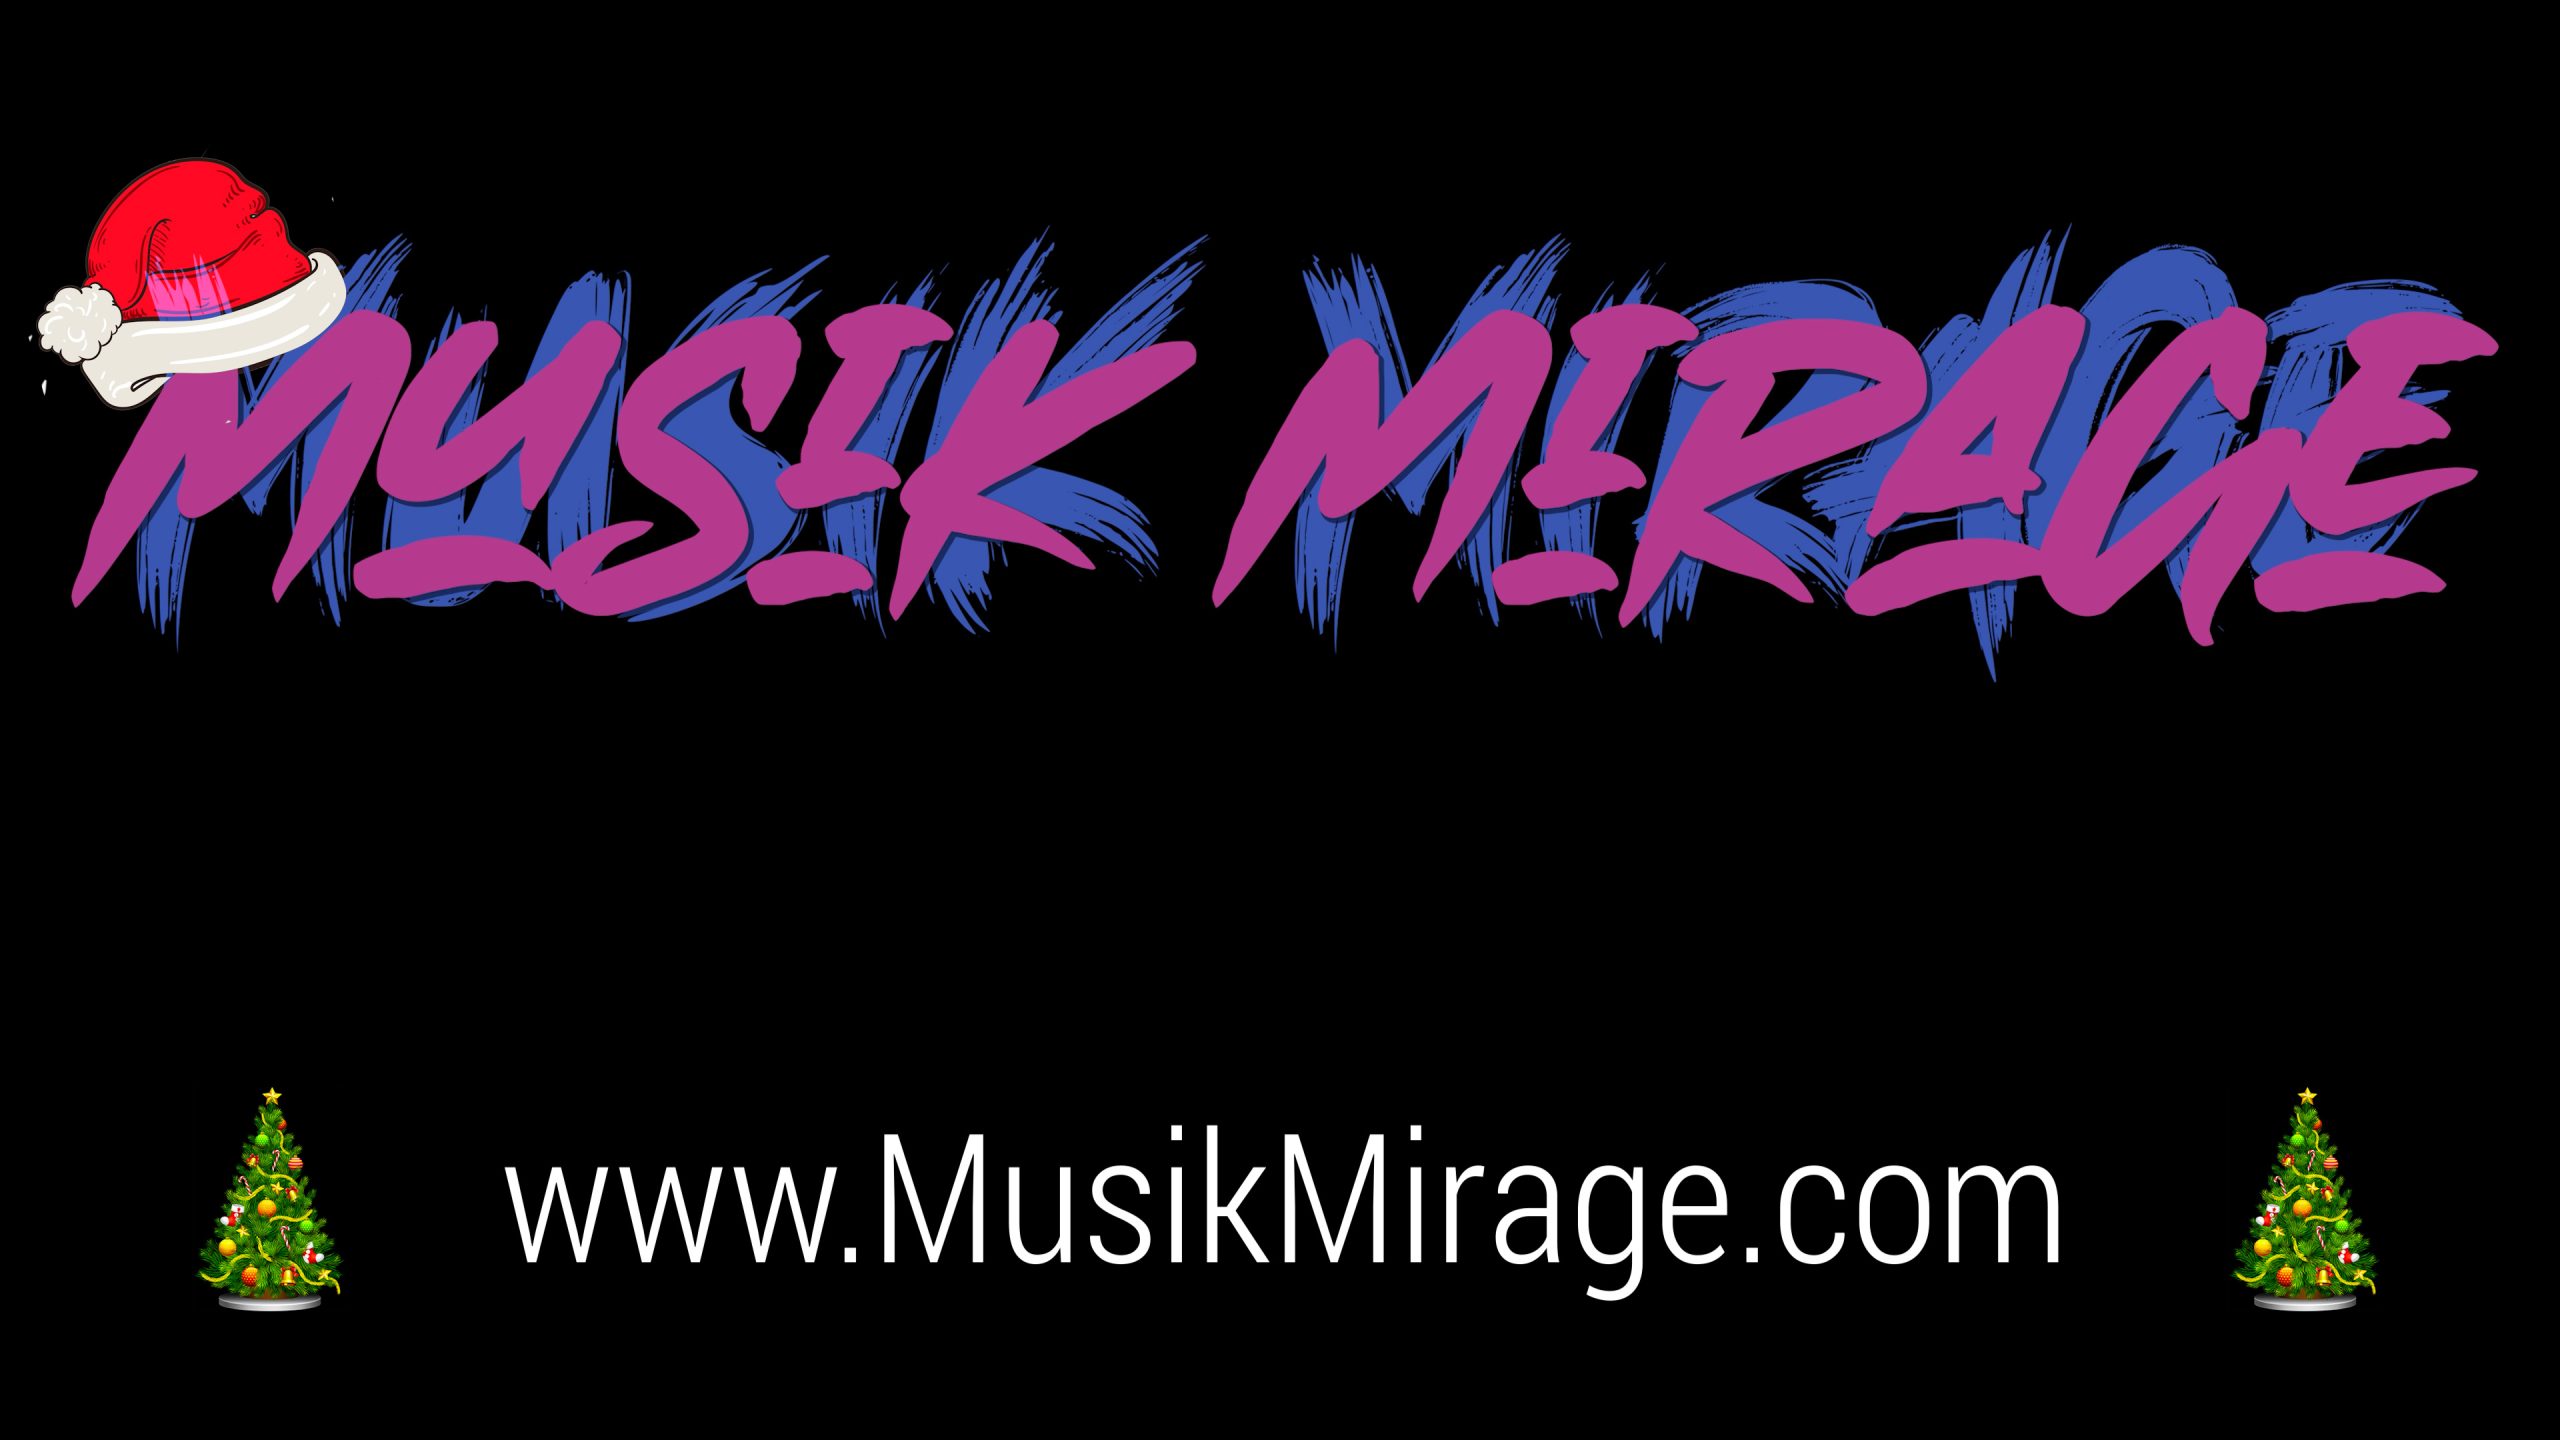 Merry Christmas and Happy Holidays from Musik Mirage!!!